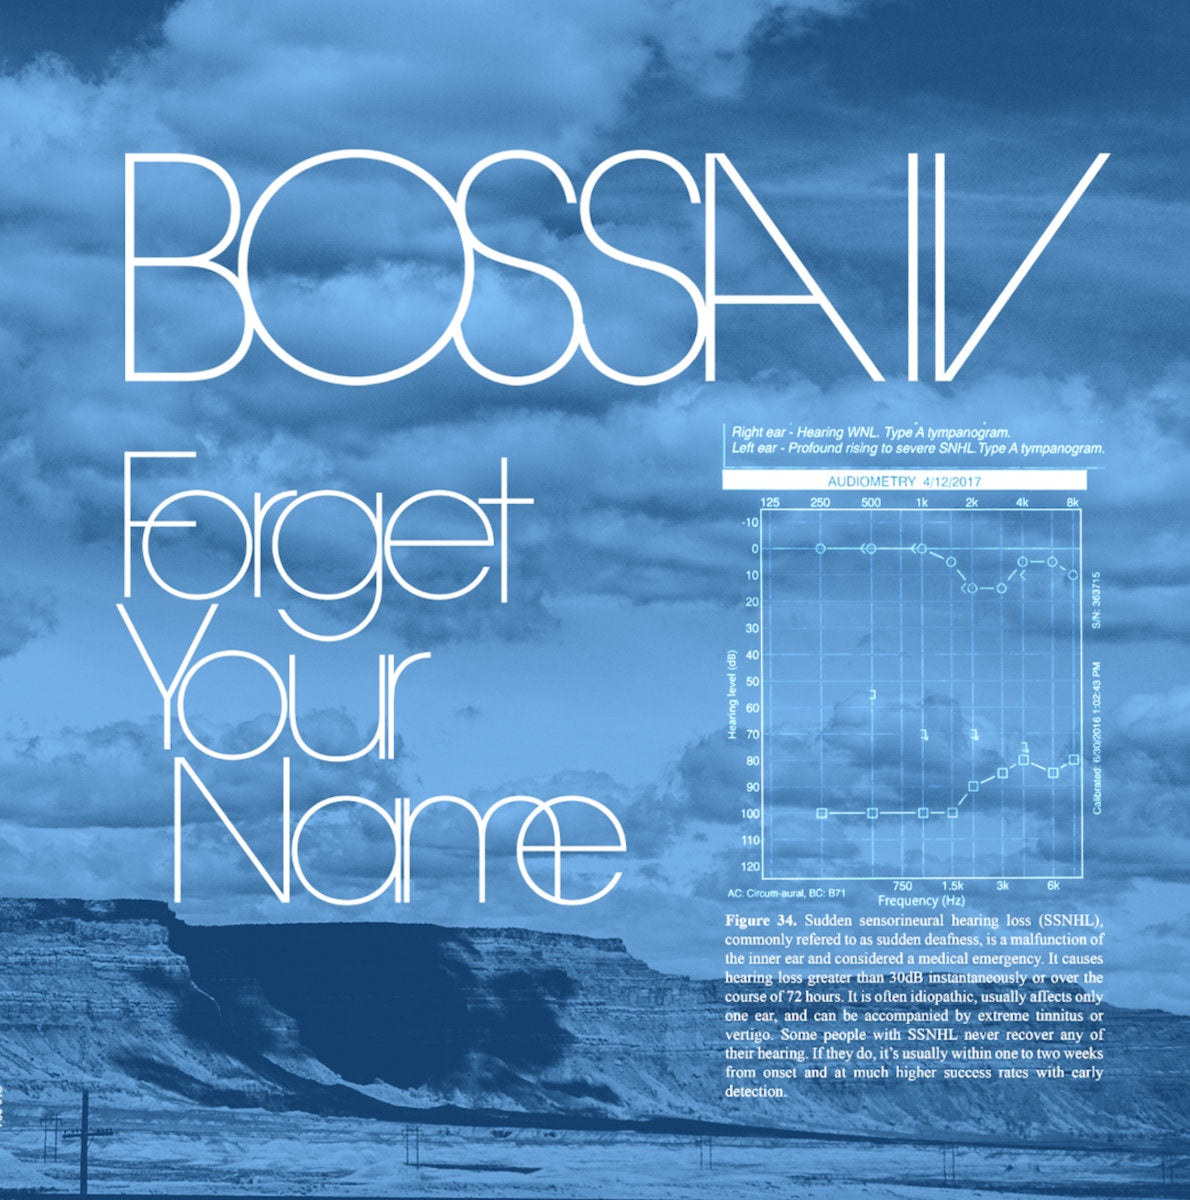 Bossa IV - Forget Your Name - New Vinyl LP Record 2019 - Chicago Indie Rock